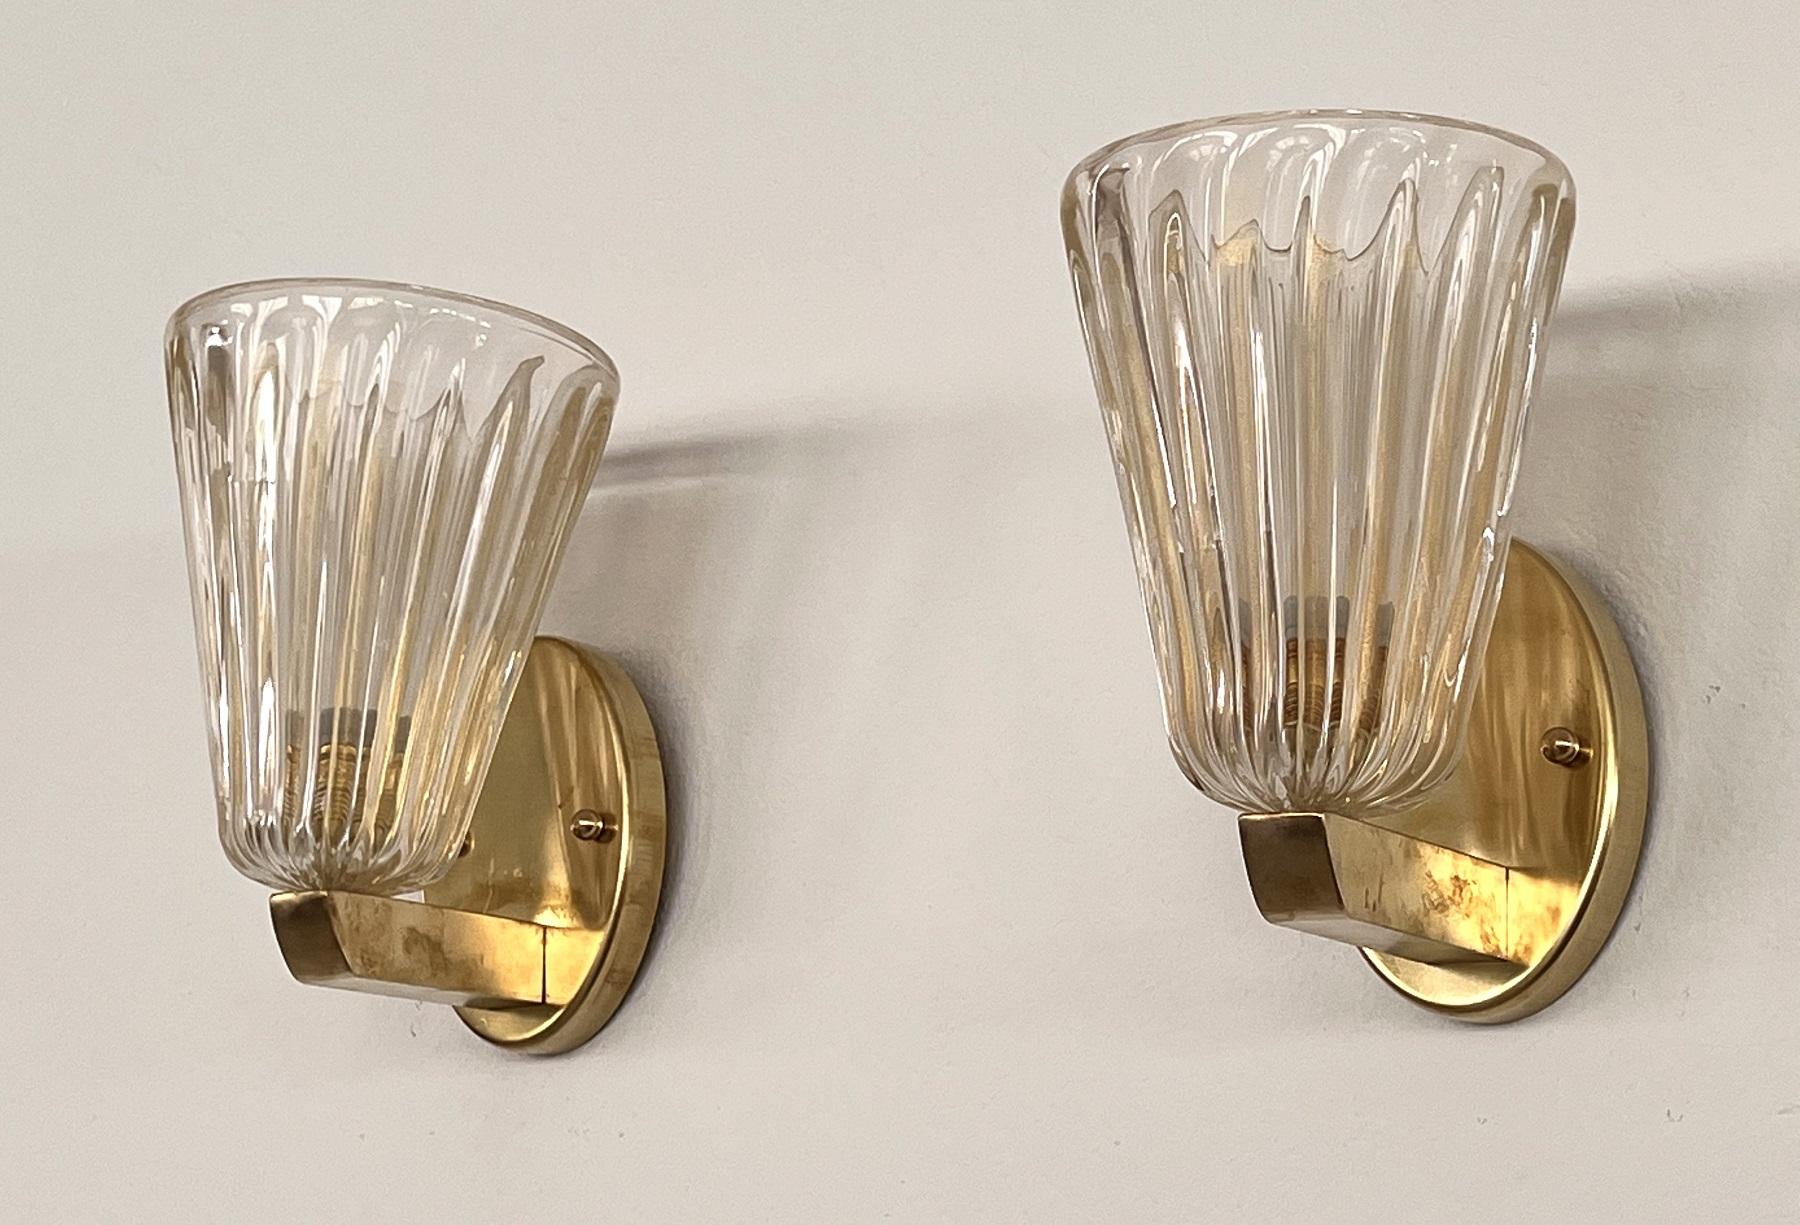 Hand-Crafted Italian Brass and Murano Glass Wall Lights or Sconces in Art Deco Style, 1990s For Sale